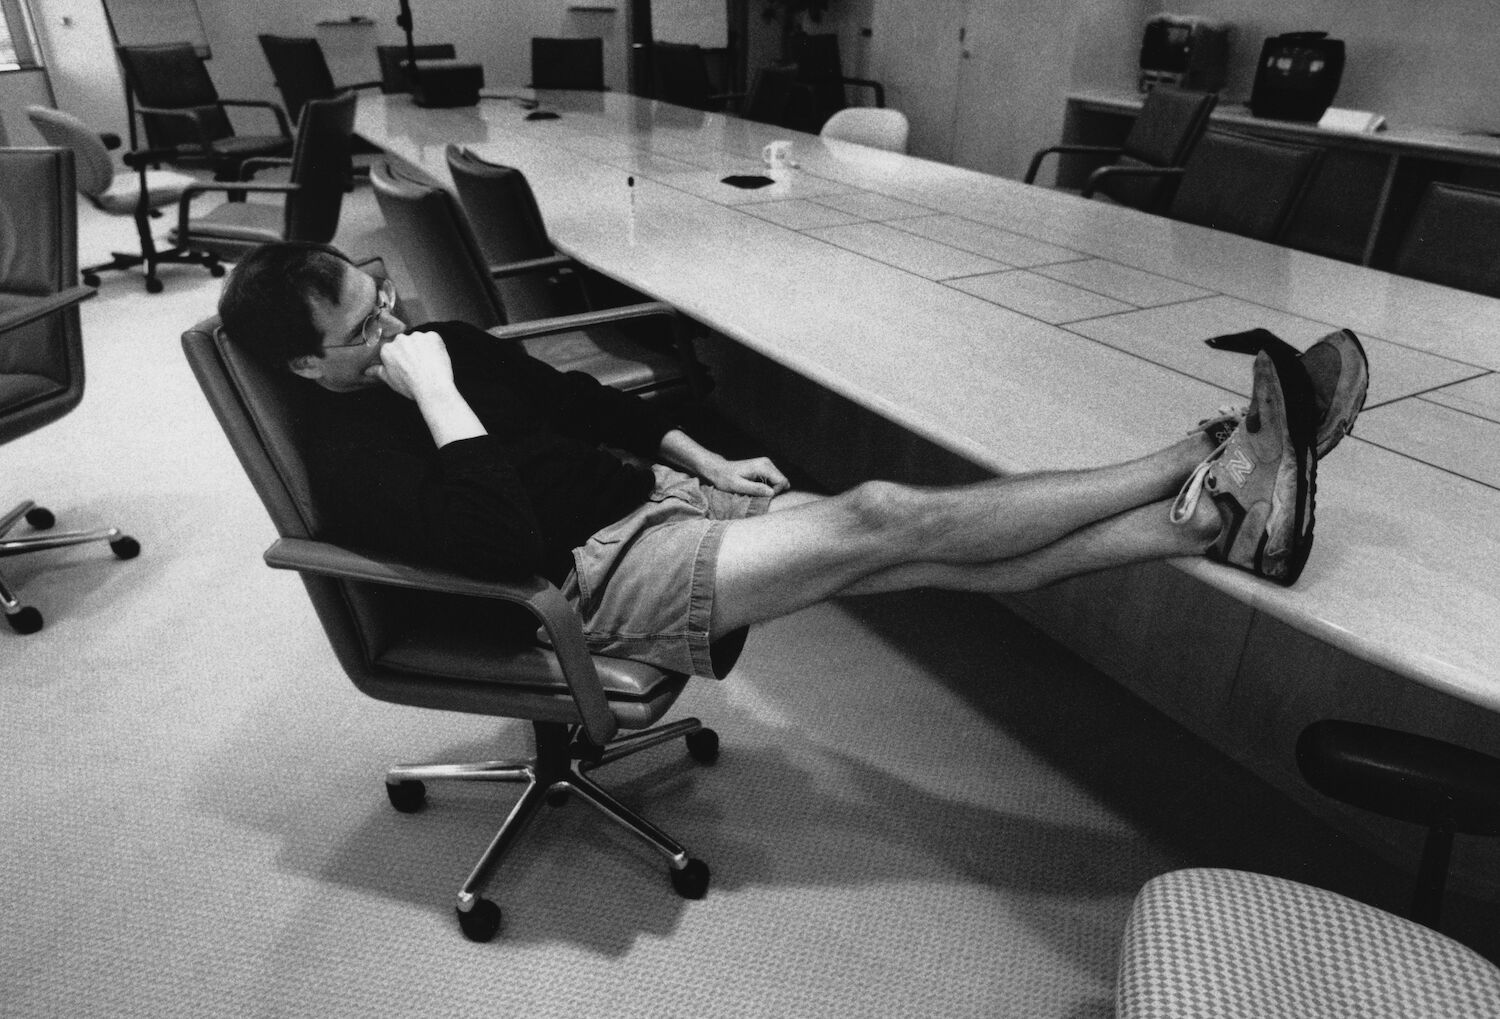 Steve leans back on his chair in a conference room. He is wearing shorts, legs stretched out and feet on the table.